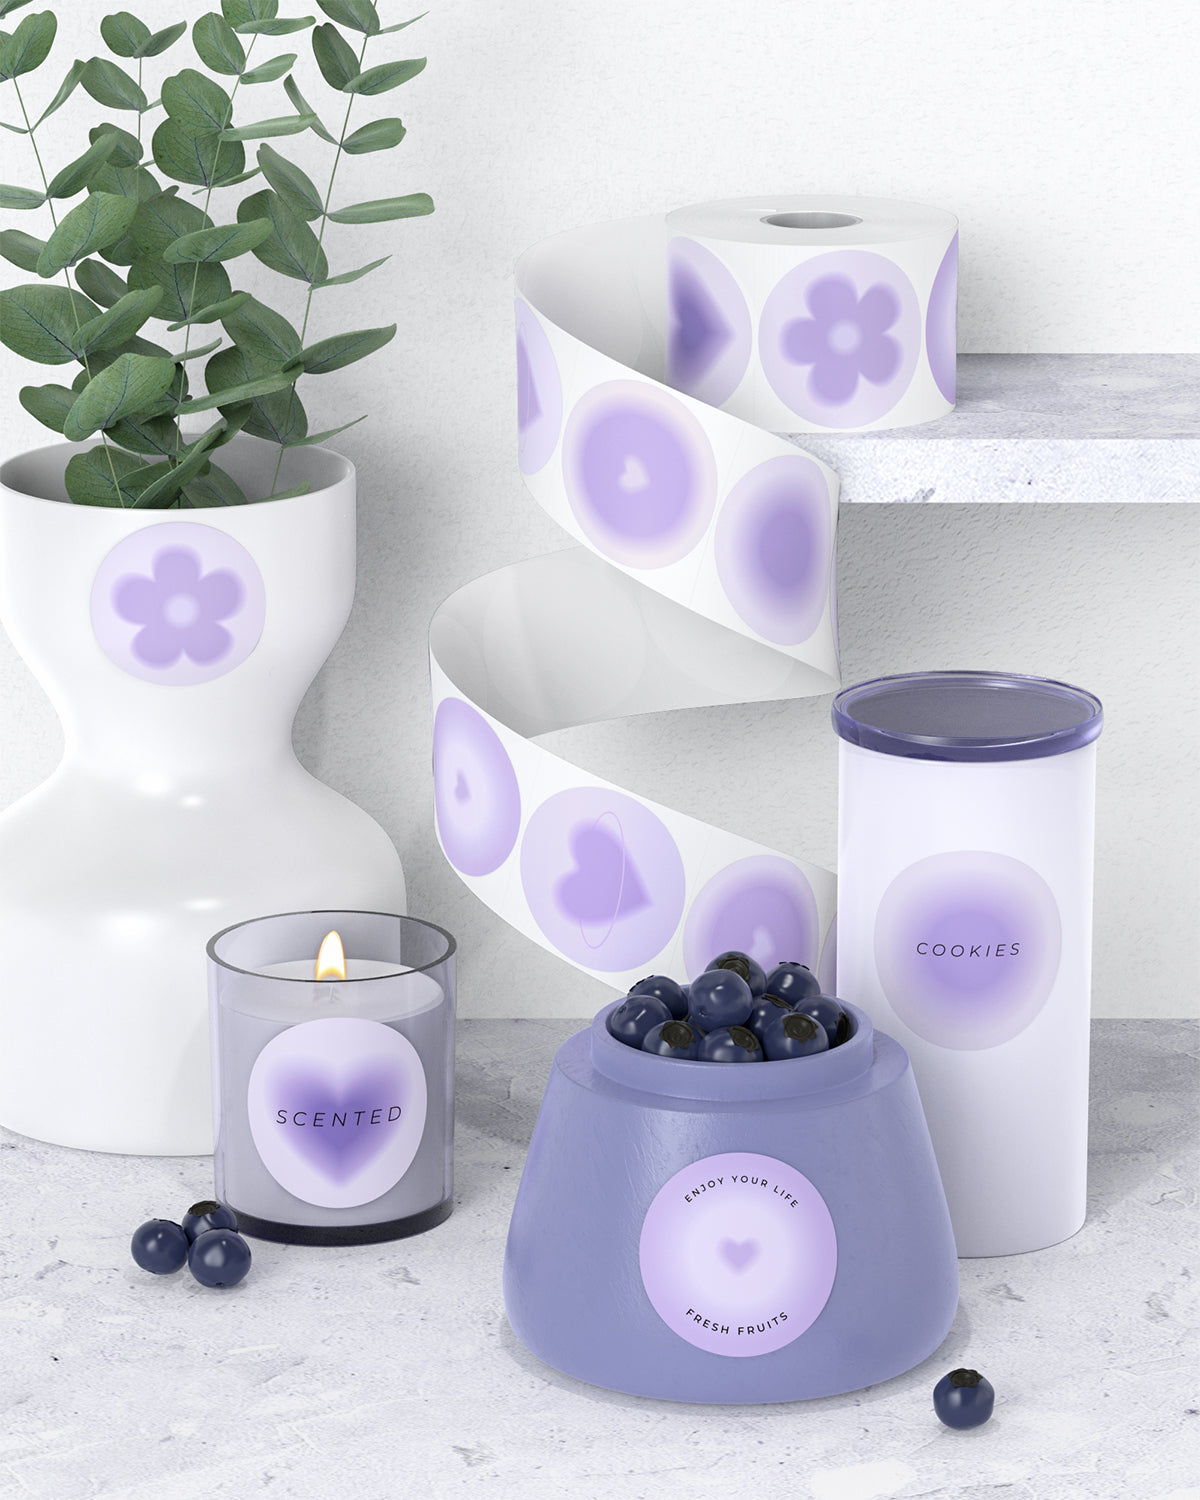 With their multipurpose design, these labels double as decorative stickers that can imbue any item with a splash of purple elegance.